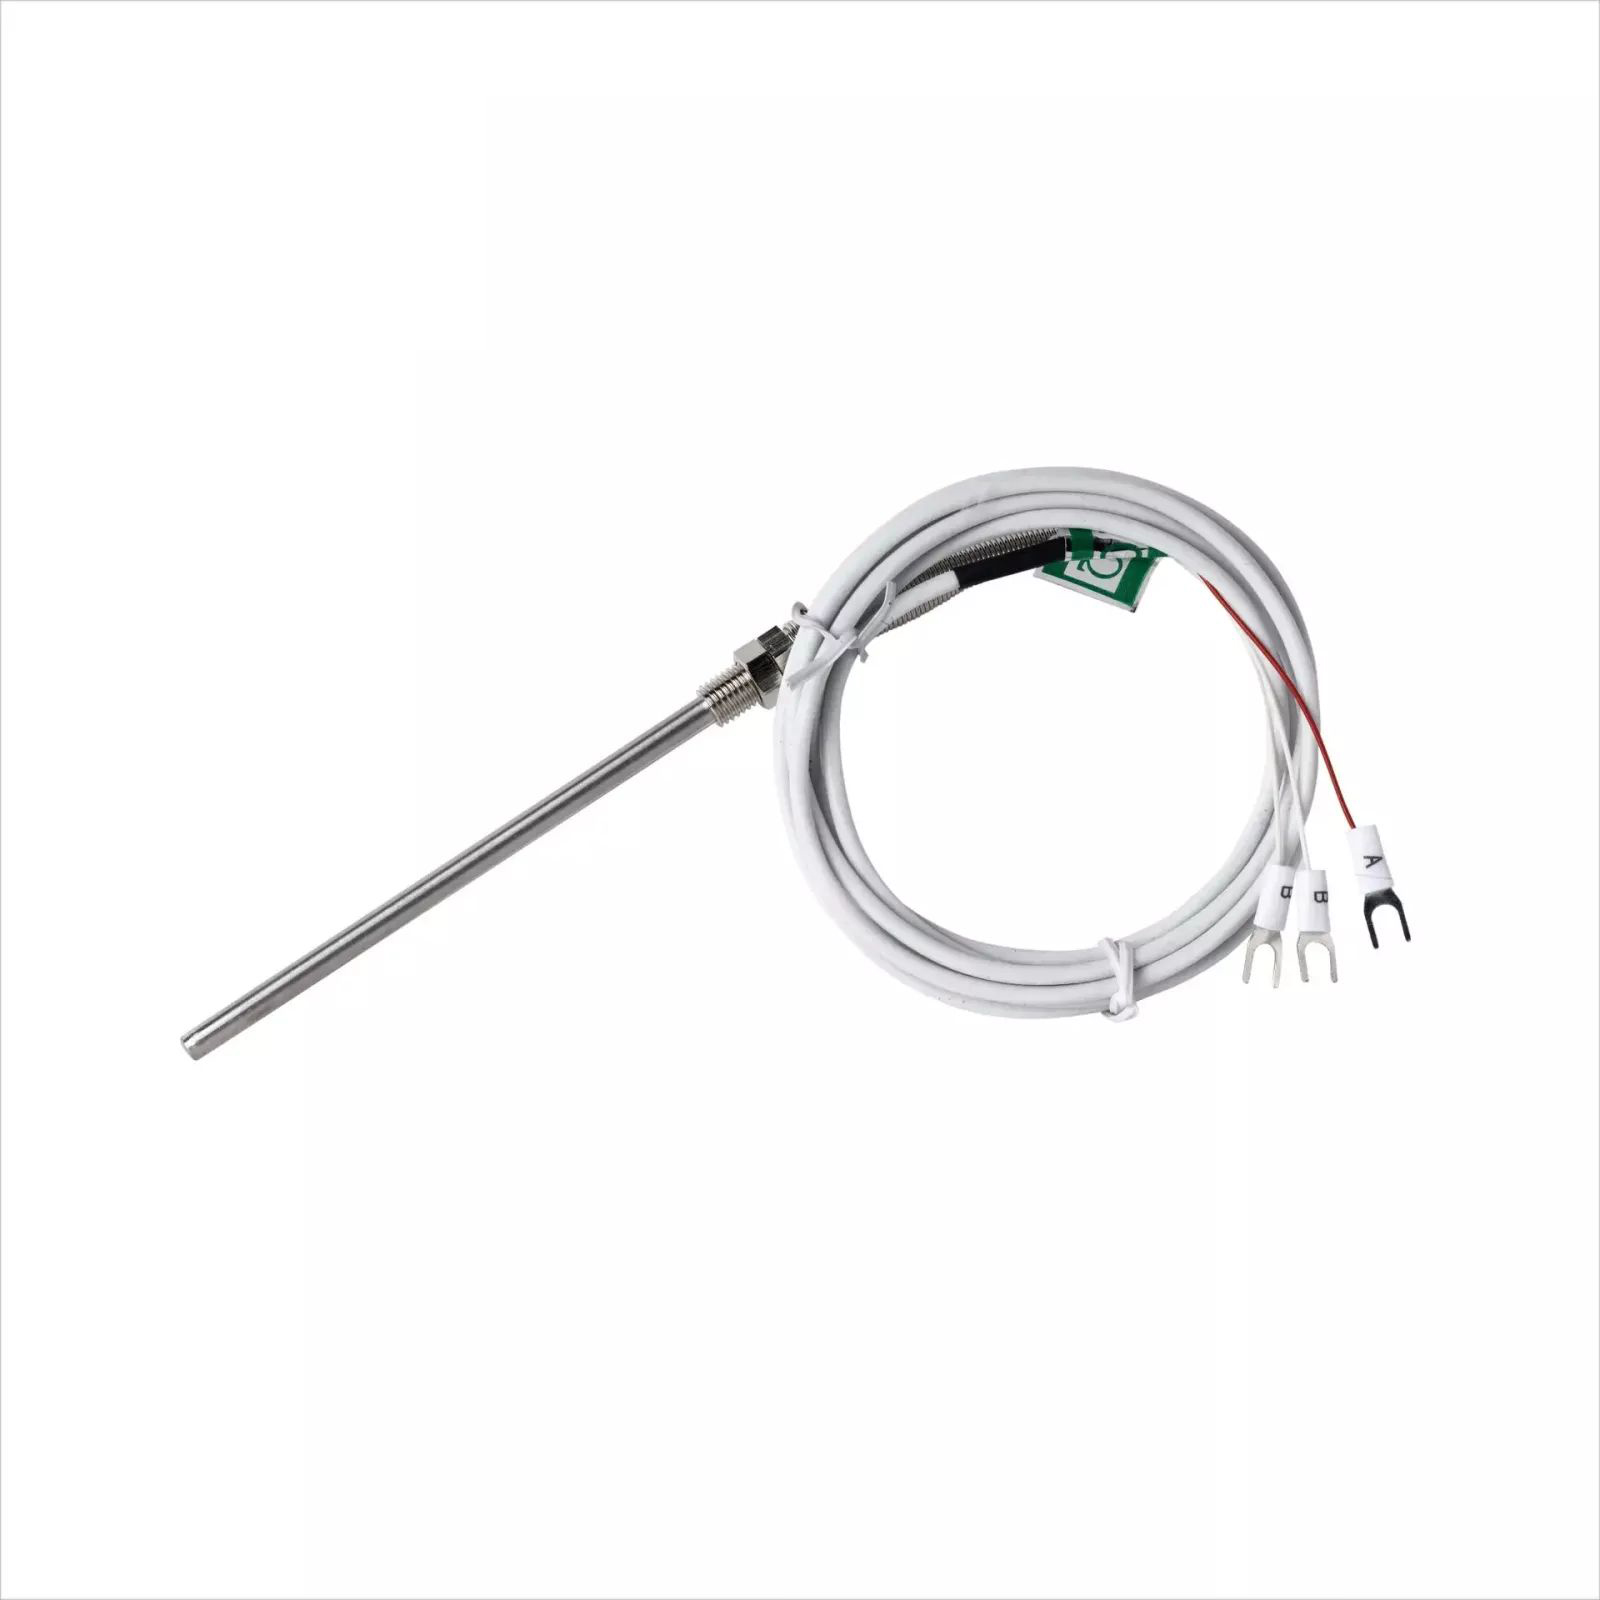 Vacorda super durable rtd pt100 industrial thermocouple